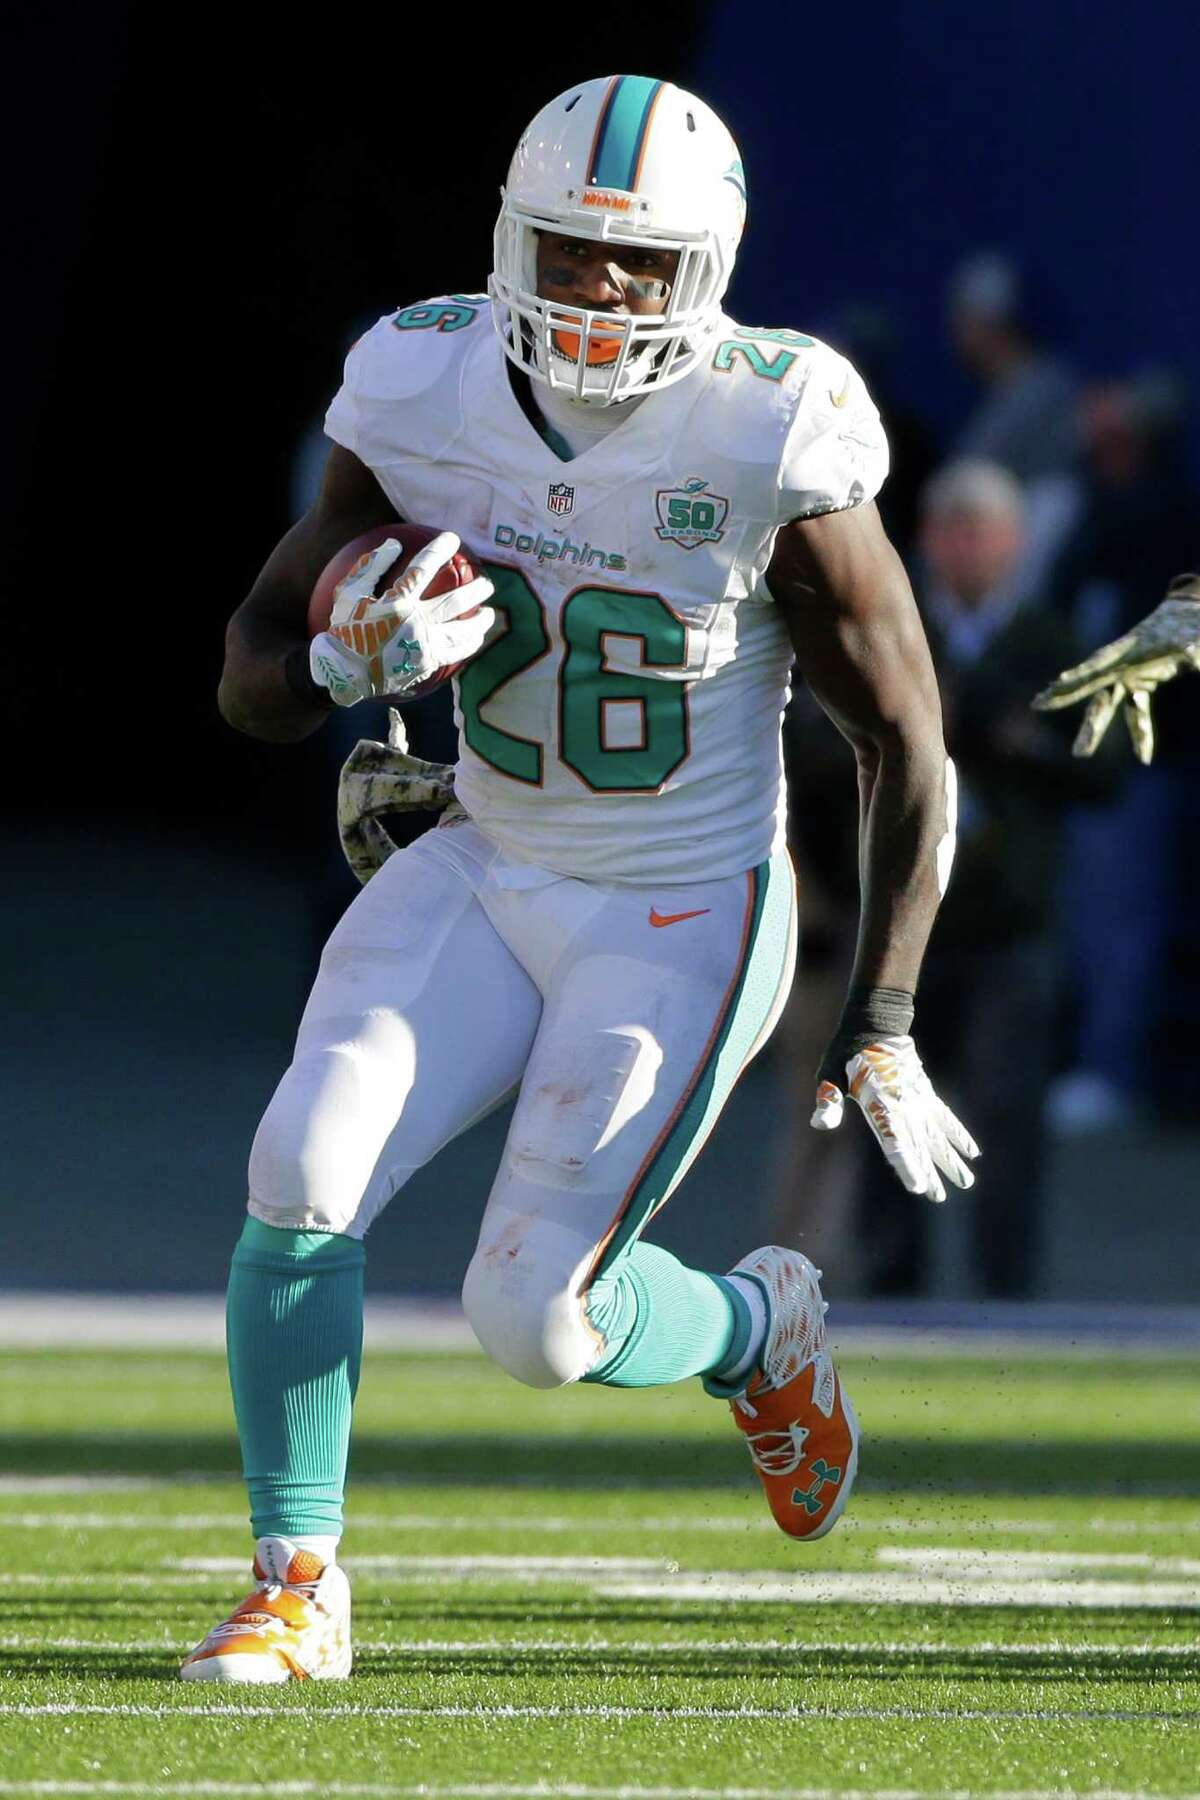 Miami Dolphins running back Lamar Miller (26) rushes during the second half of an NFL football game against the Buffalo Bills Sunday, Nov. 8, 2015, in Orchard Park, N.Y. (AP Photo/Bill Wippert)